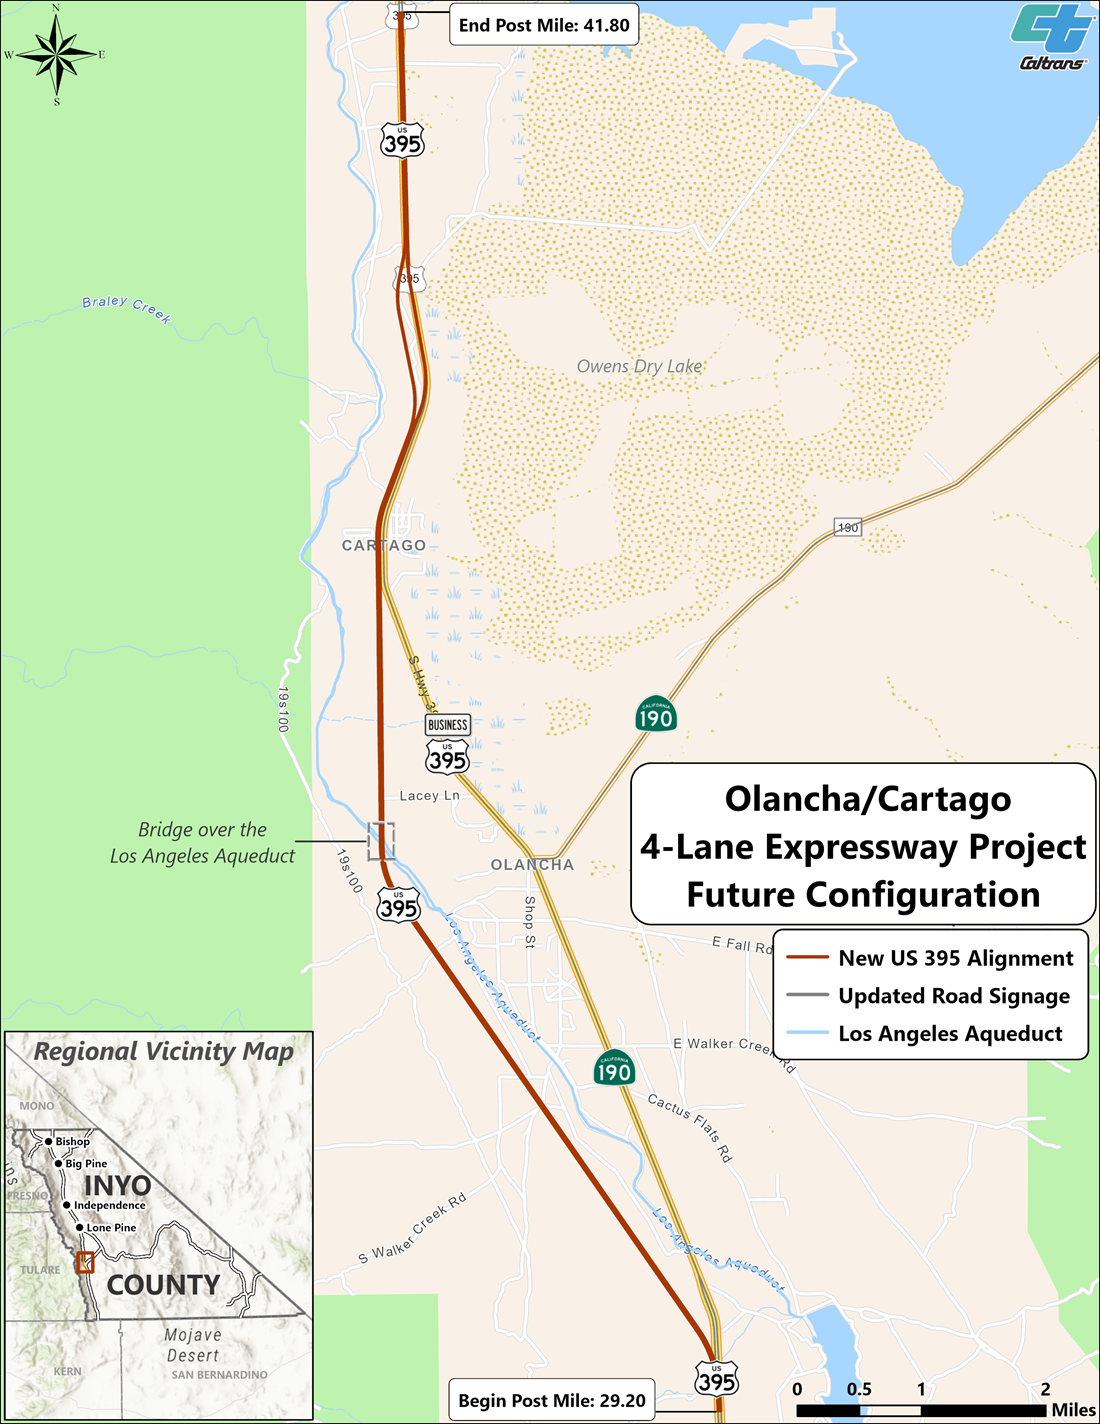 Map detailing the new route for U.S. 395 through the Olancha-Cartago area. The project will begin at postmile 29.20 and end at postmile 41.80. The new route will require a new bridge be built over the Los Angeles Aquaduct.